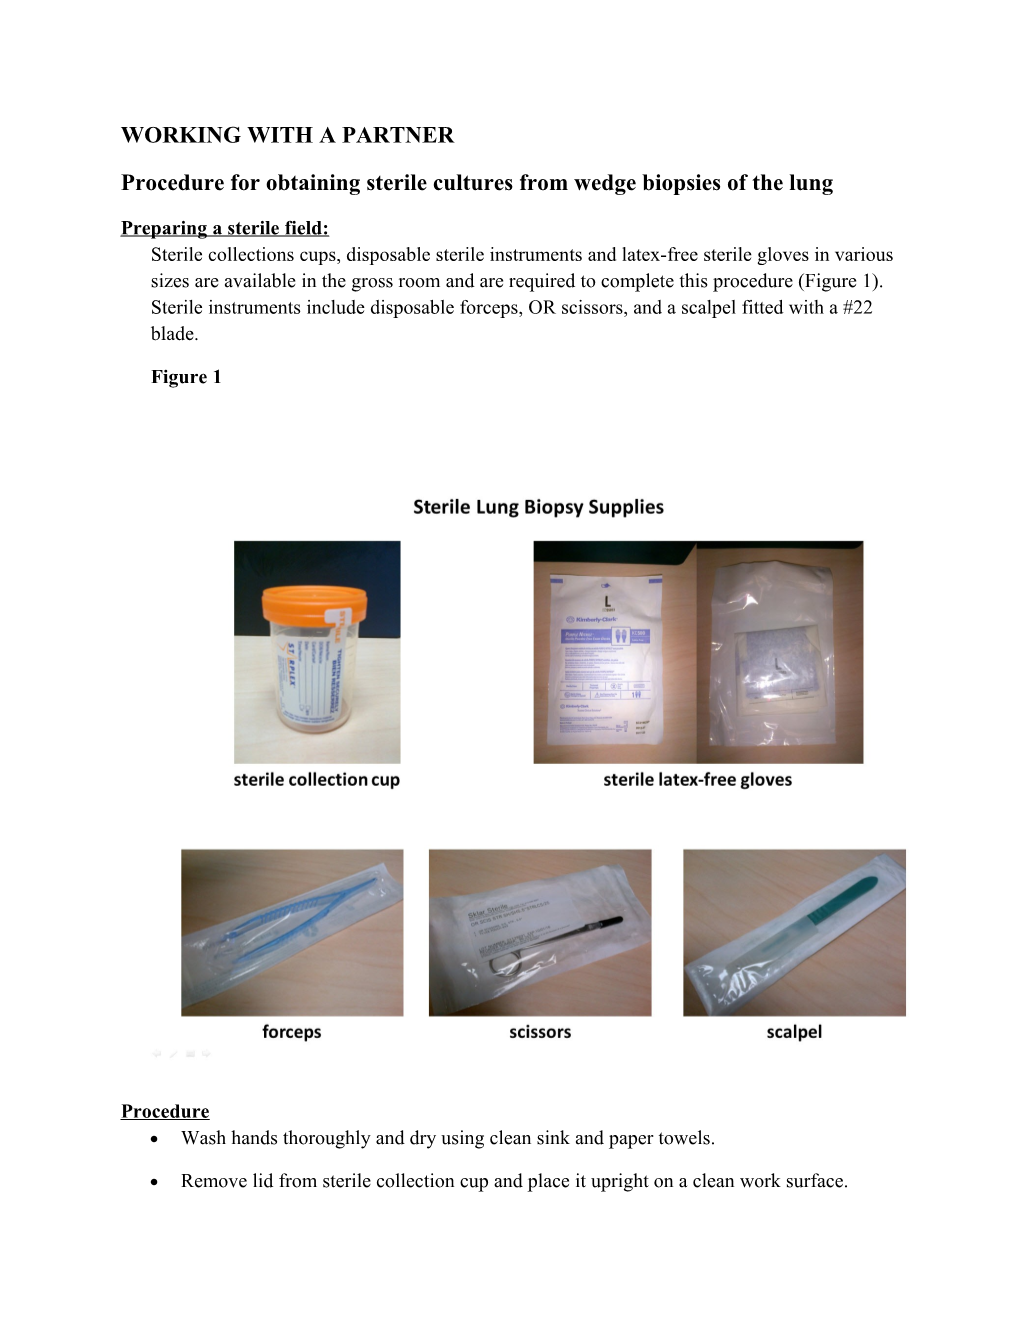 Procedure for Obtaining Sterile Cultures from Wedge Biopsies of the Lung